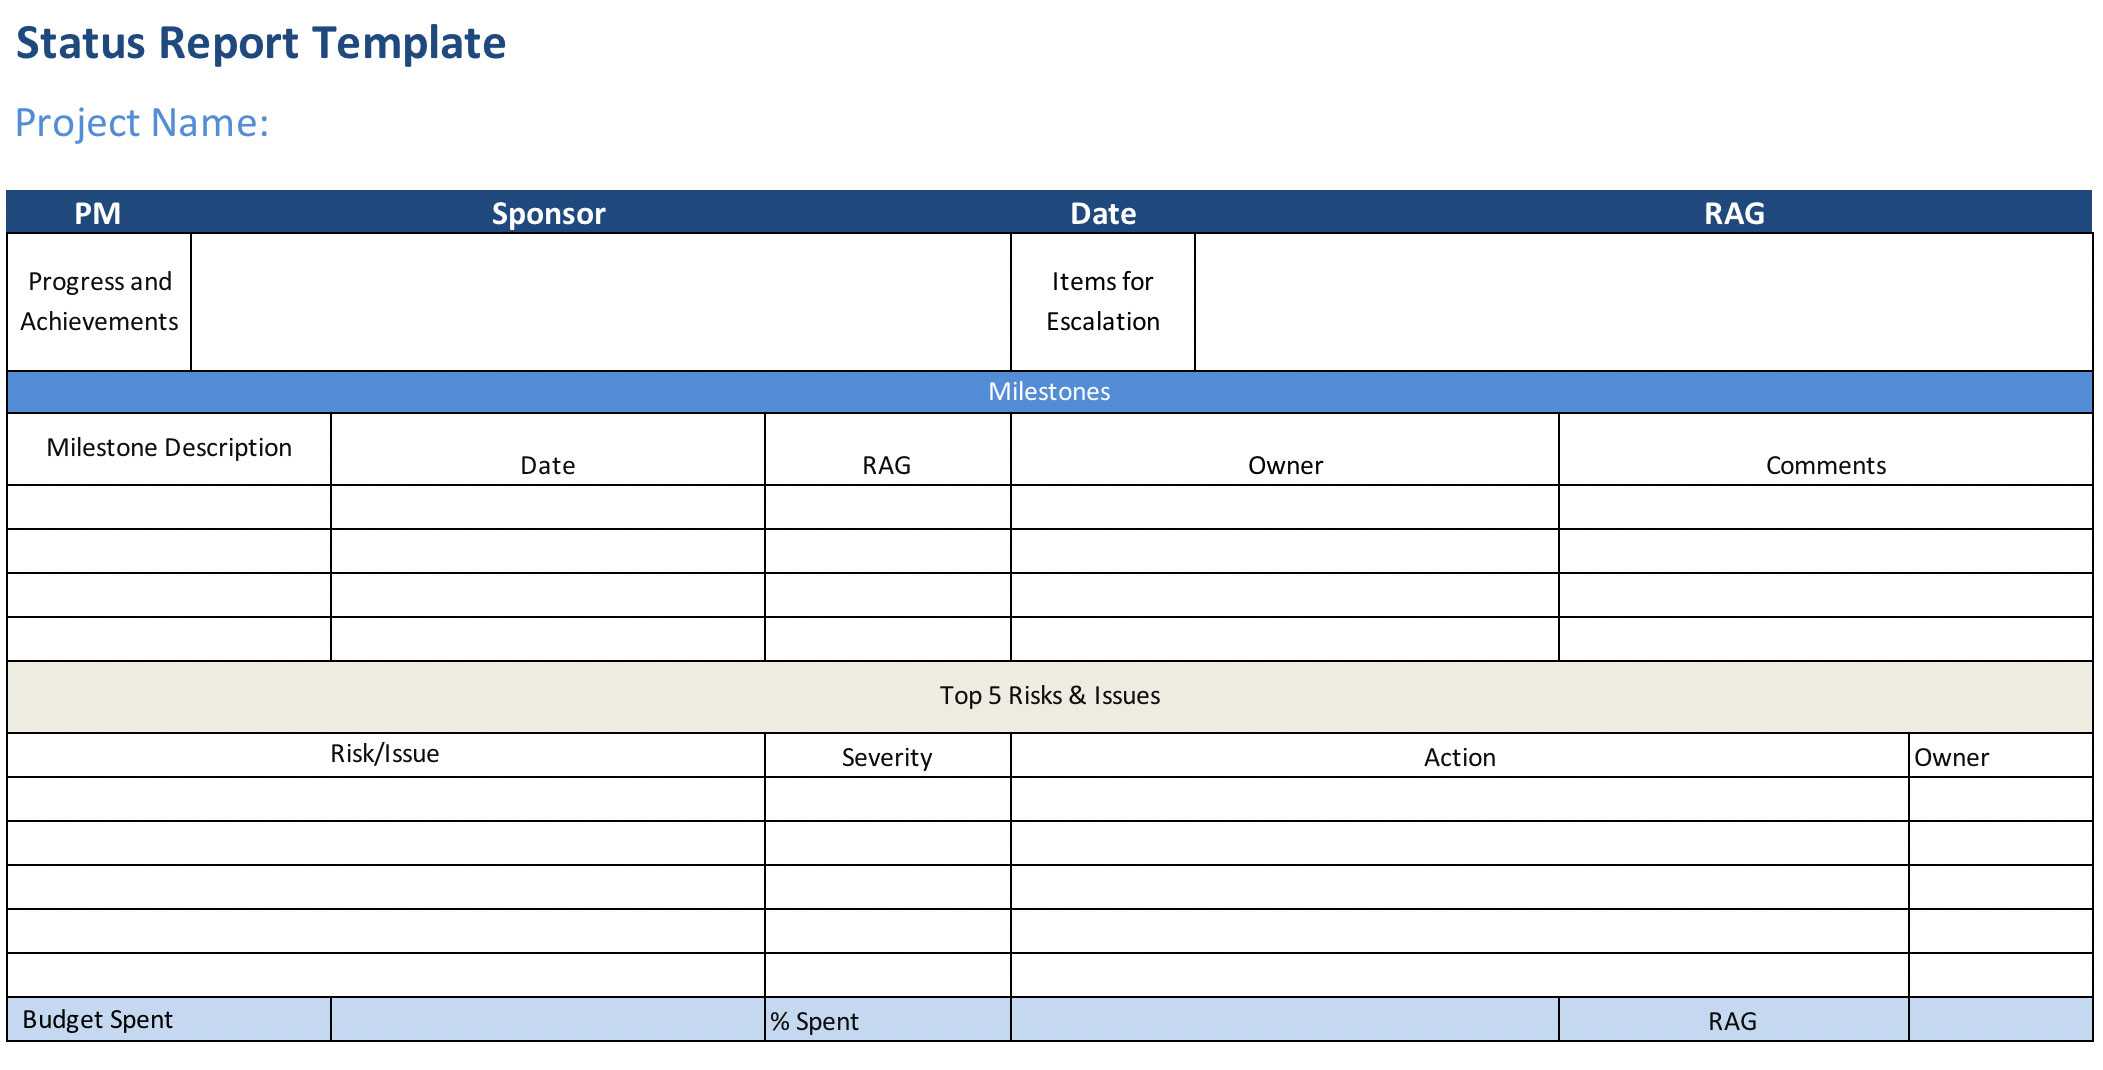 Project Status Report (Free Excel Template) – Projectmanager Inside Project Manager Status Report Template